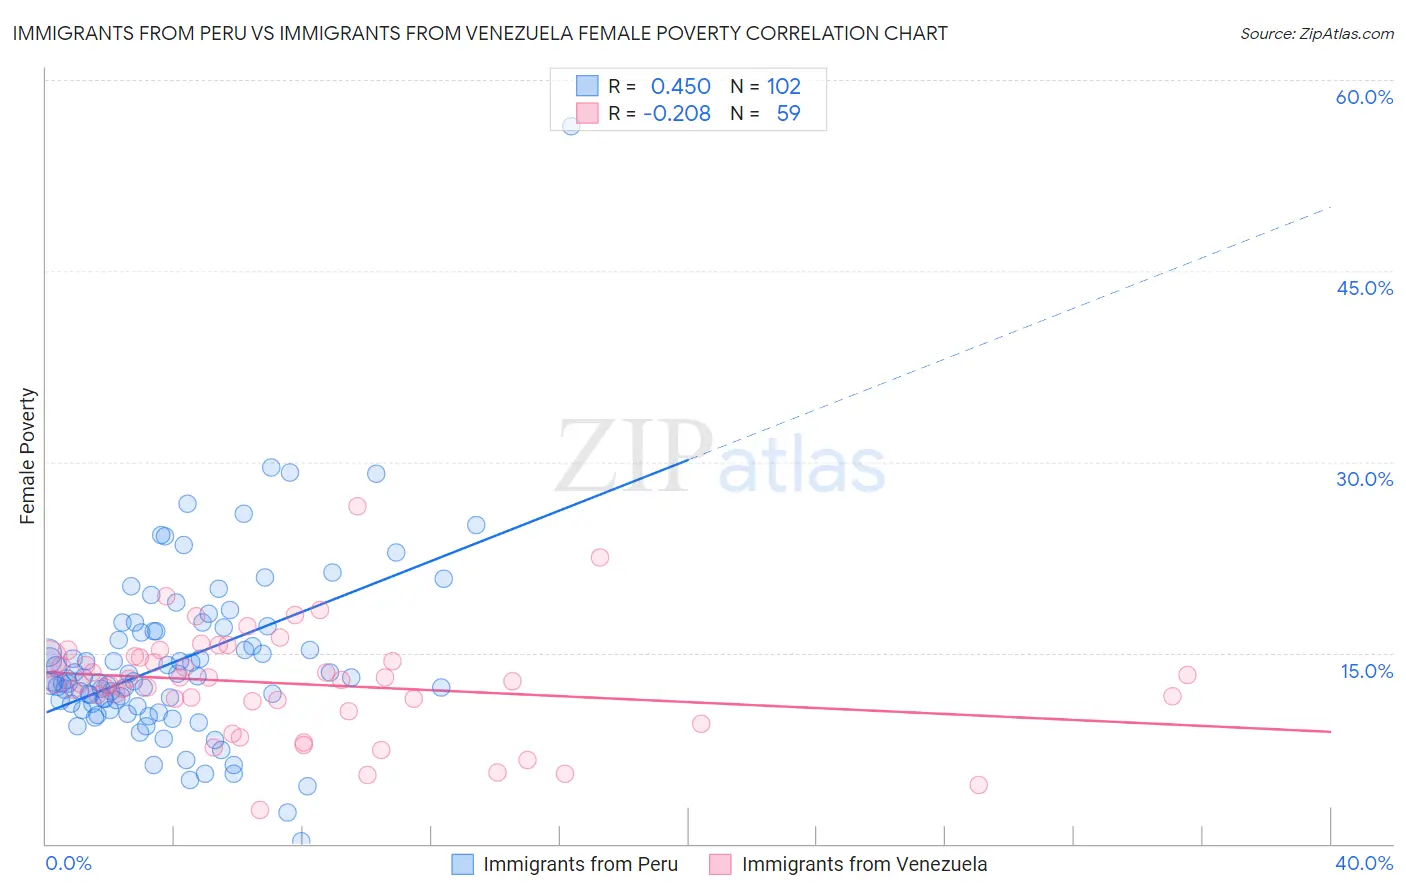 Immigrants from Peru vs Immigrants from Venezuela Female Poverty